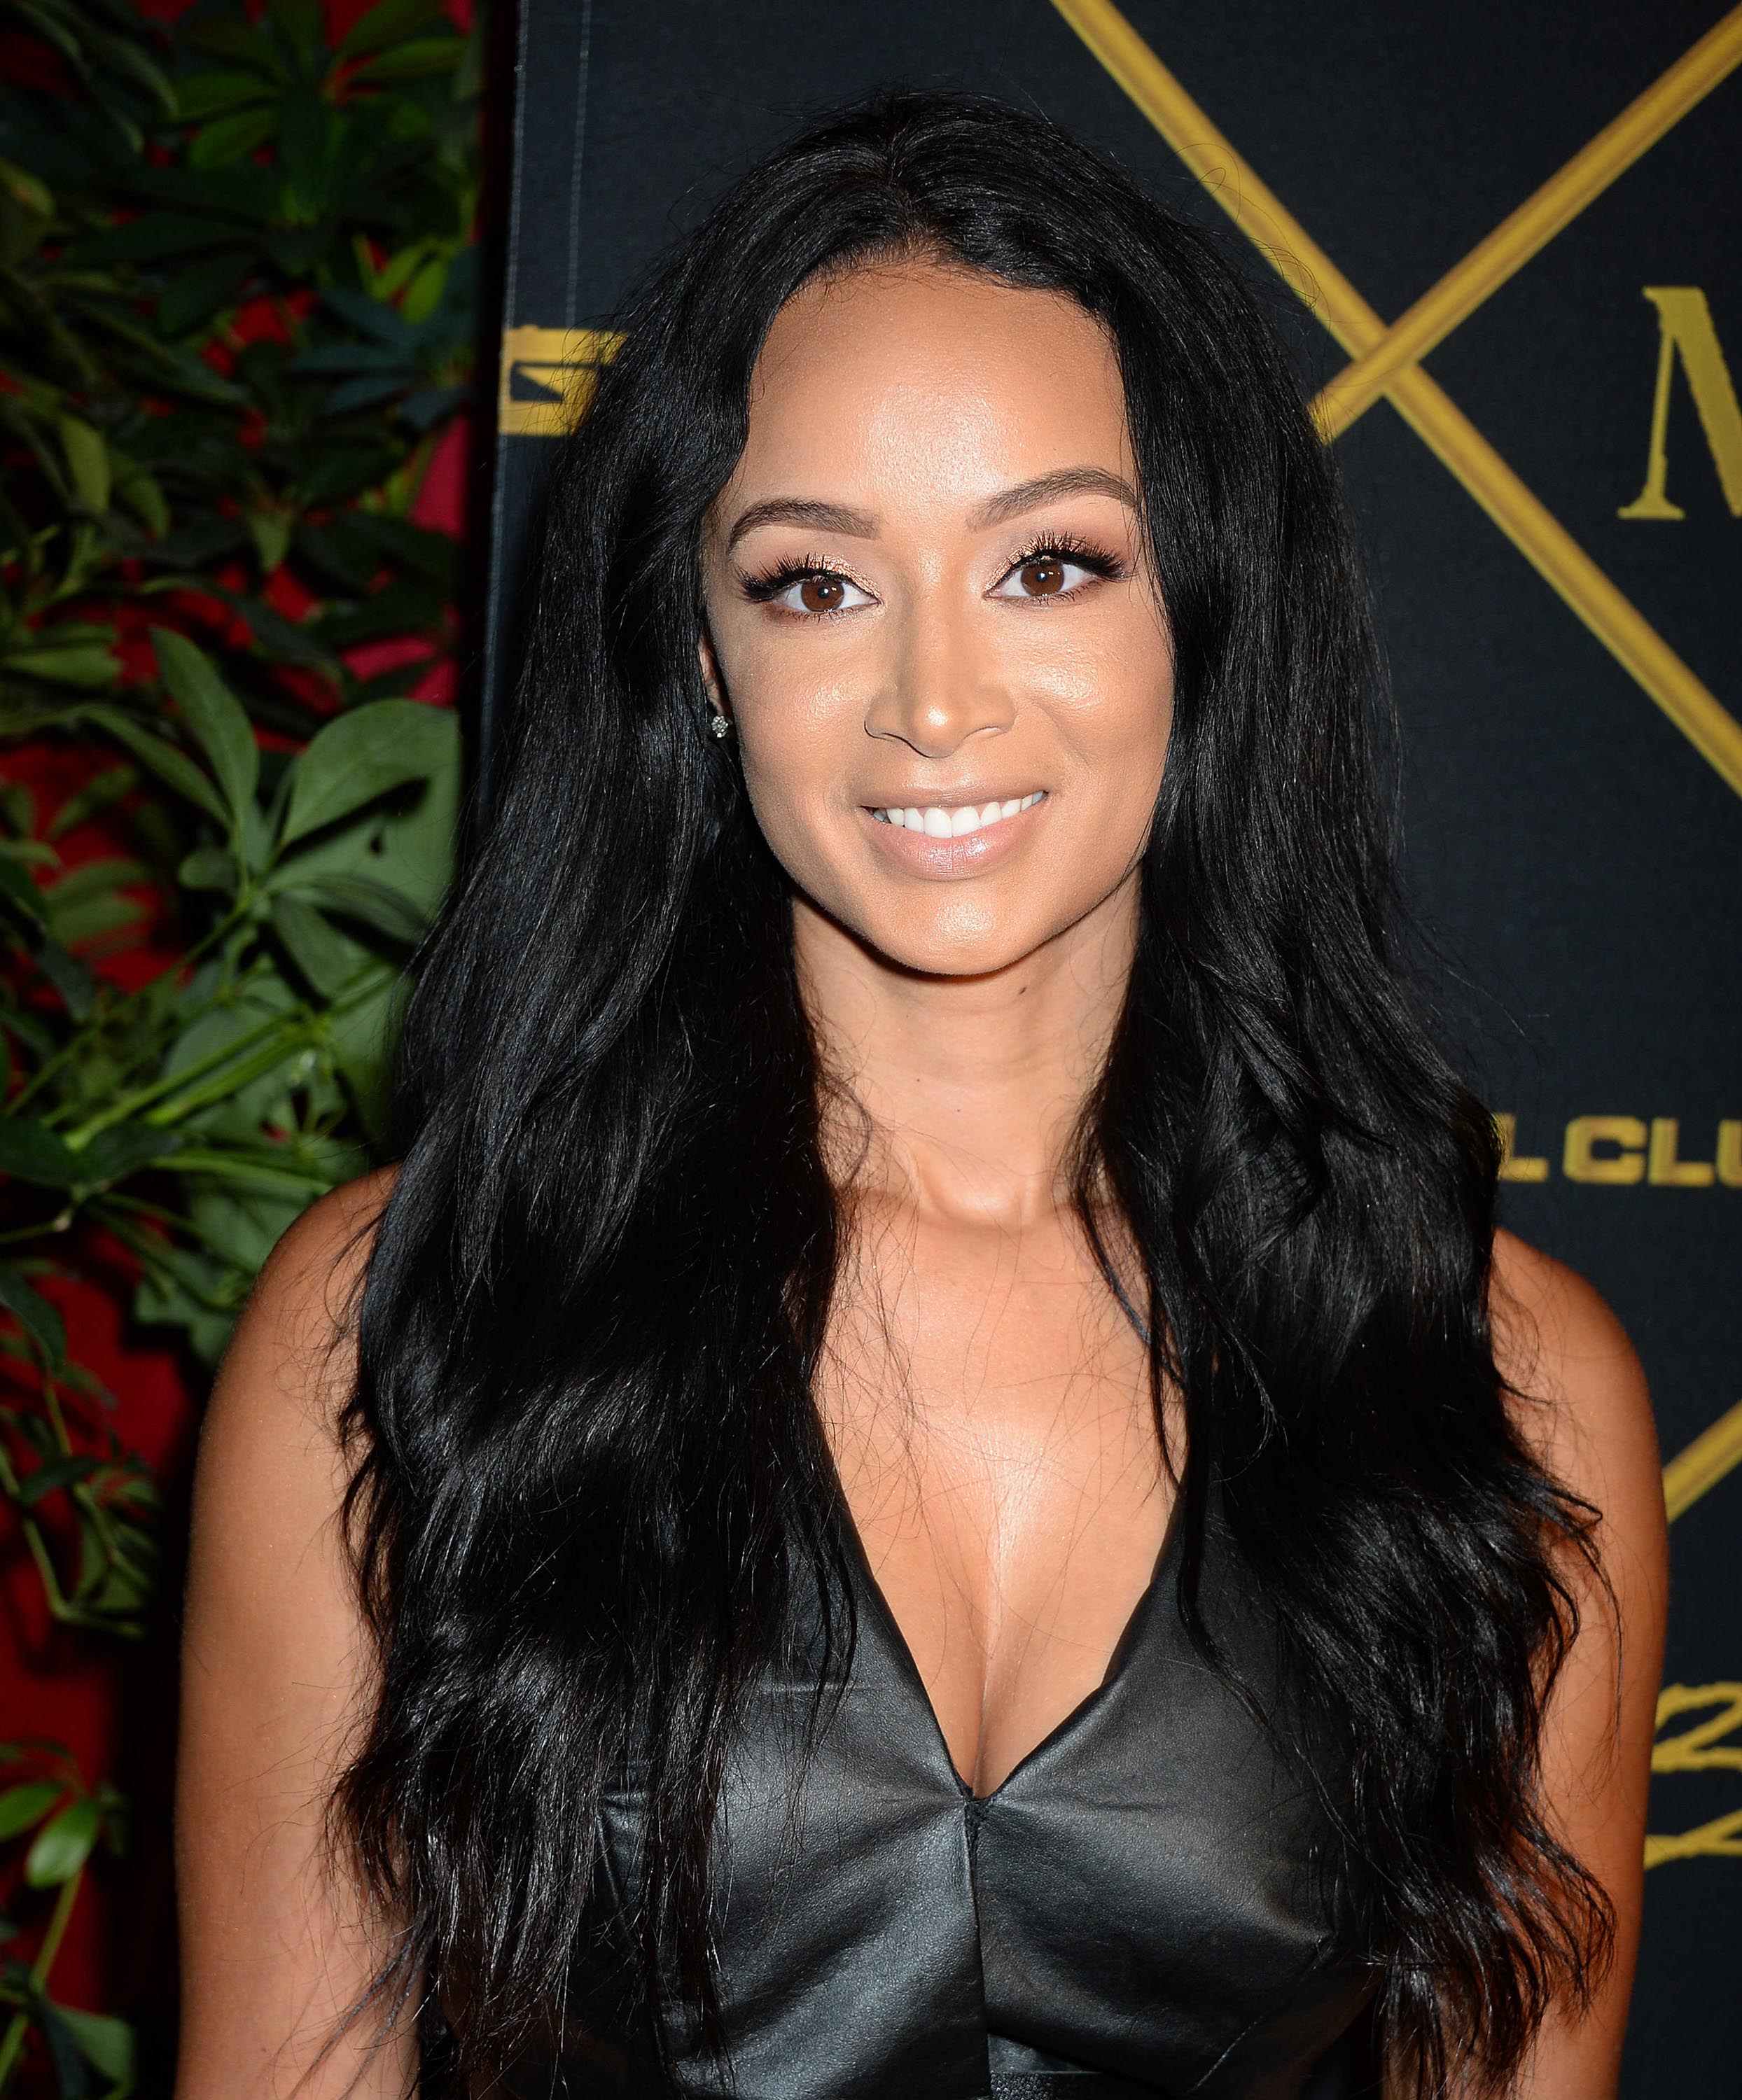 Draya Michele attends the 2016 MAXIM Hot 100 Party